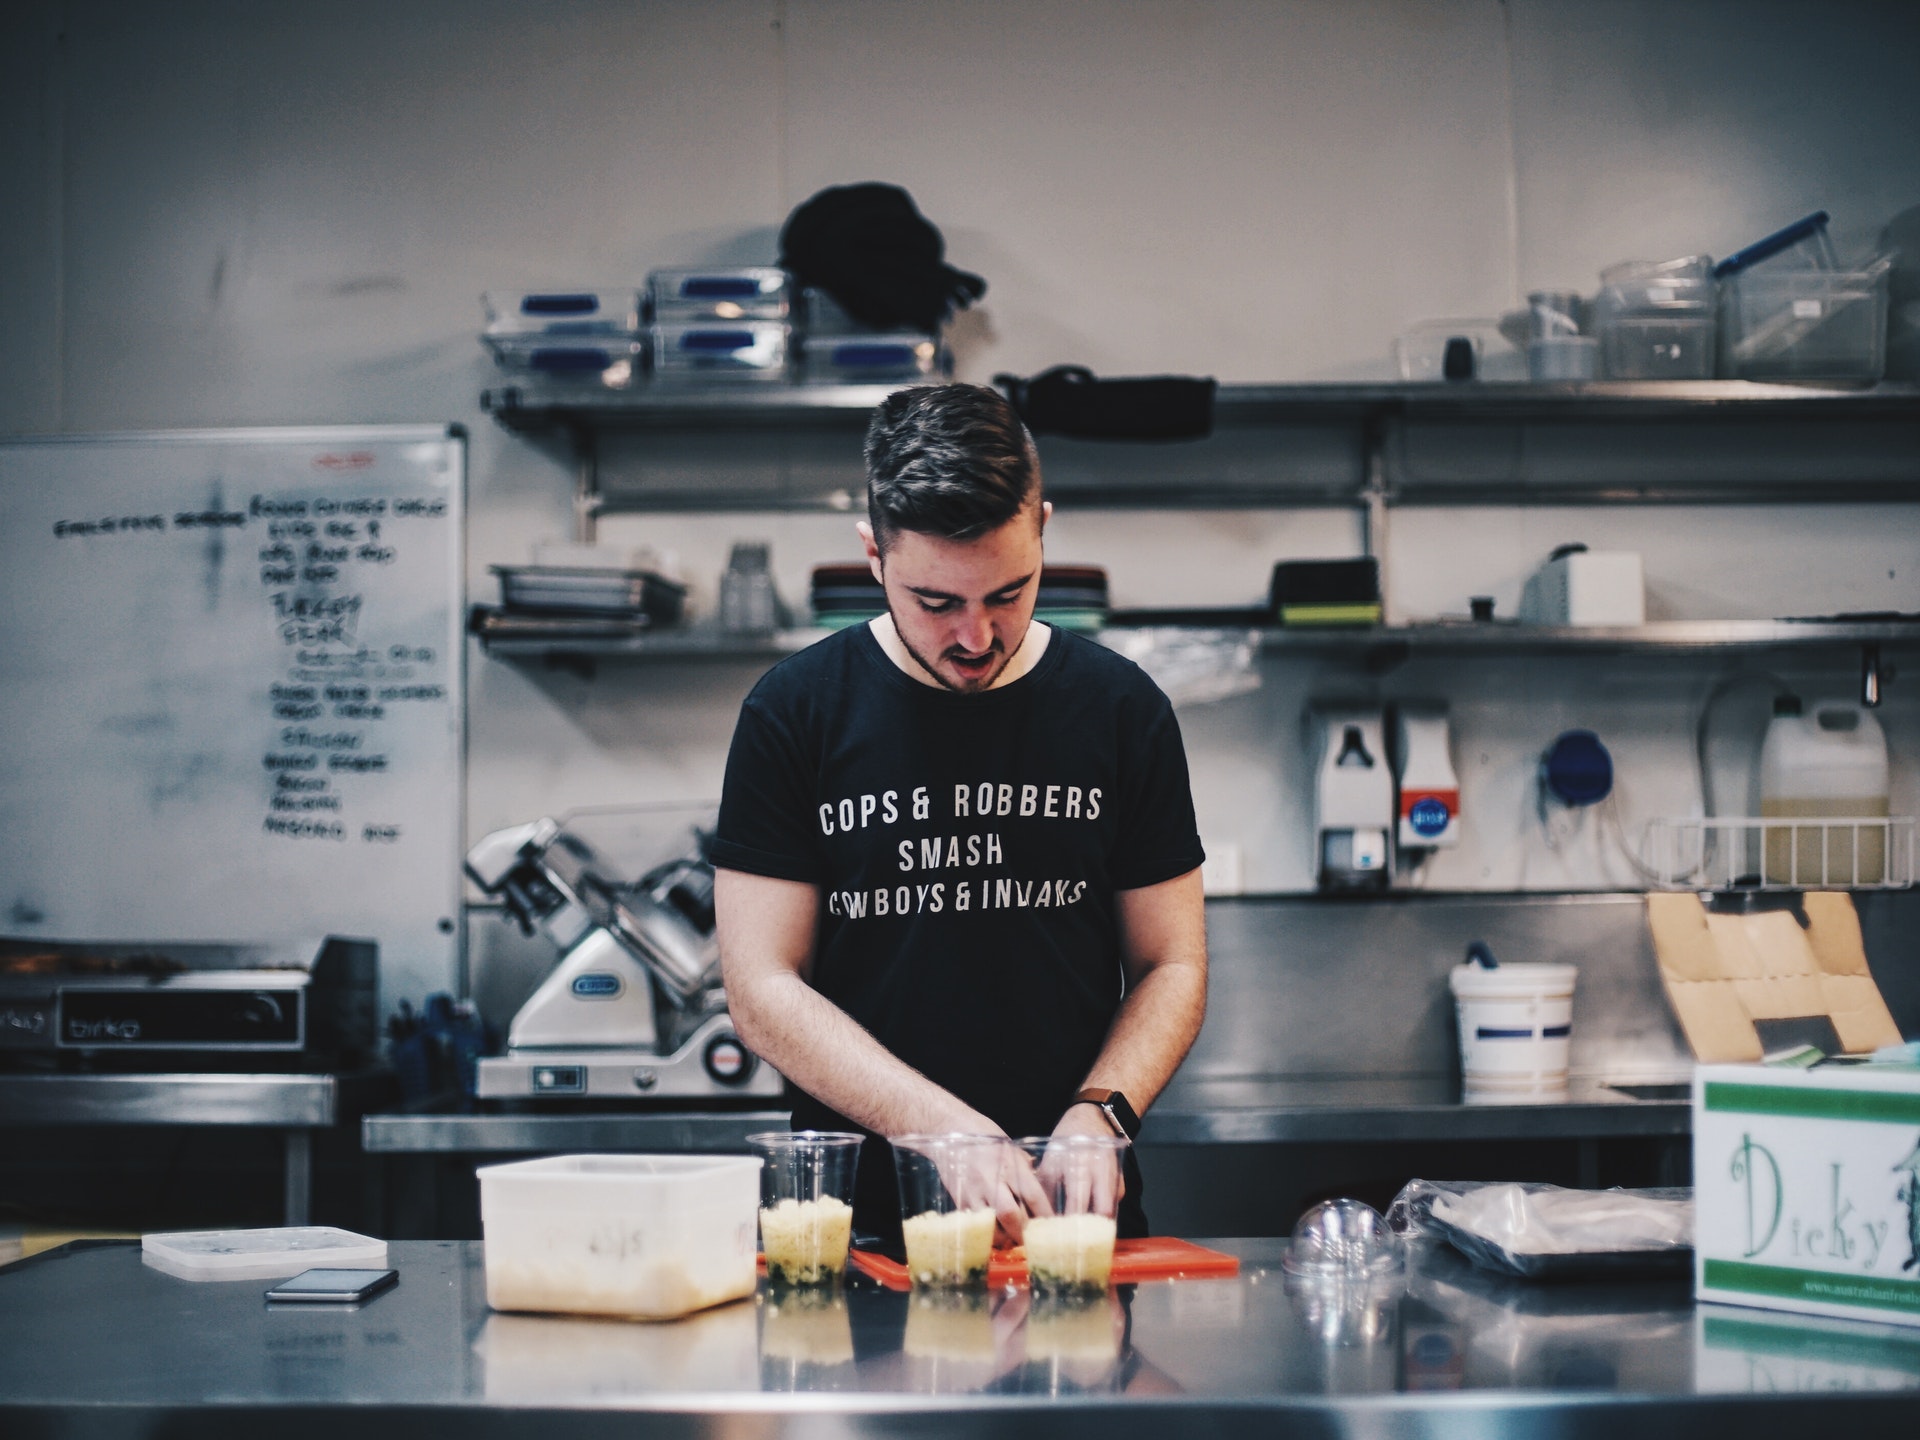 A chef working in an artisanal café